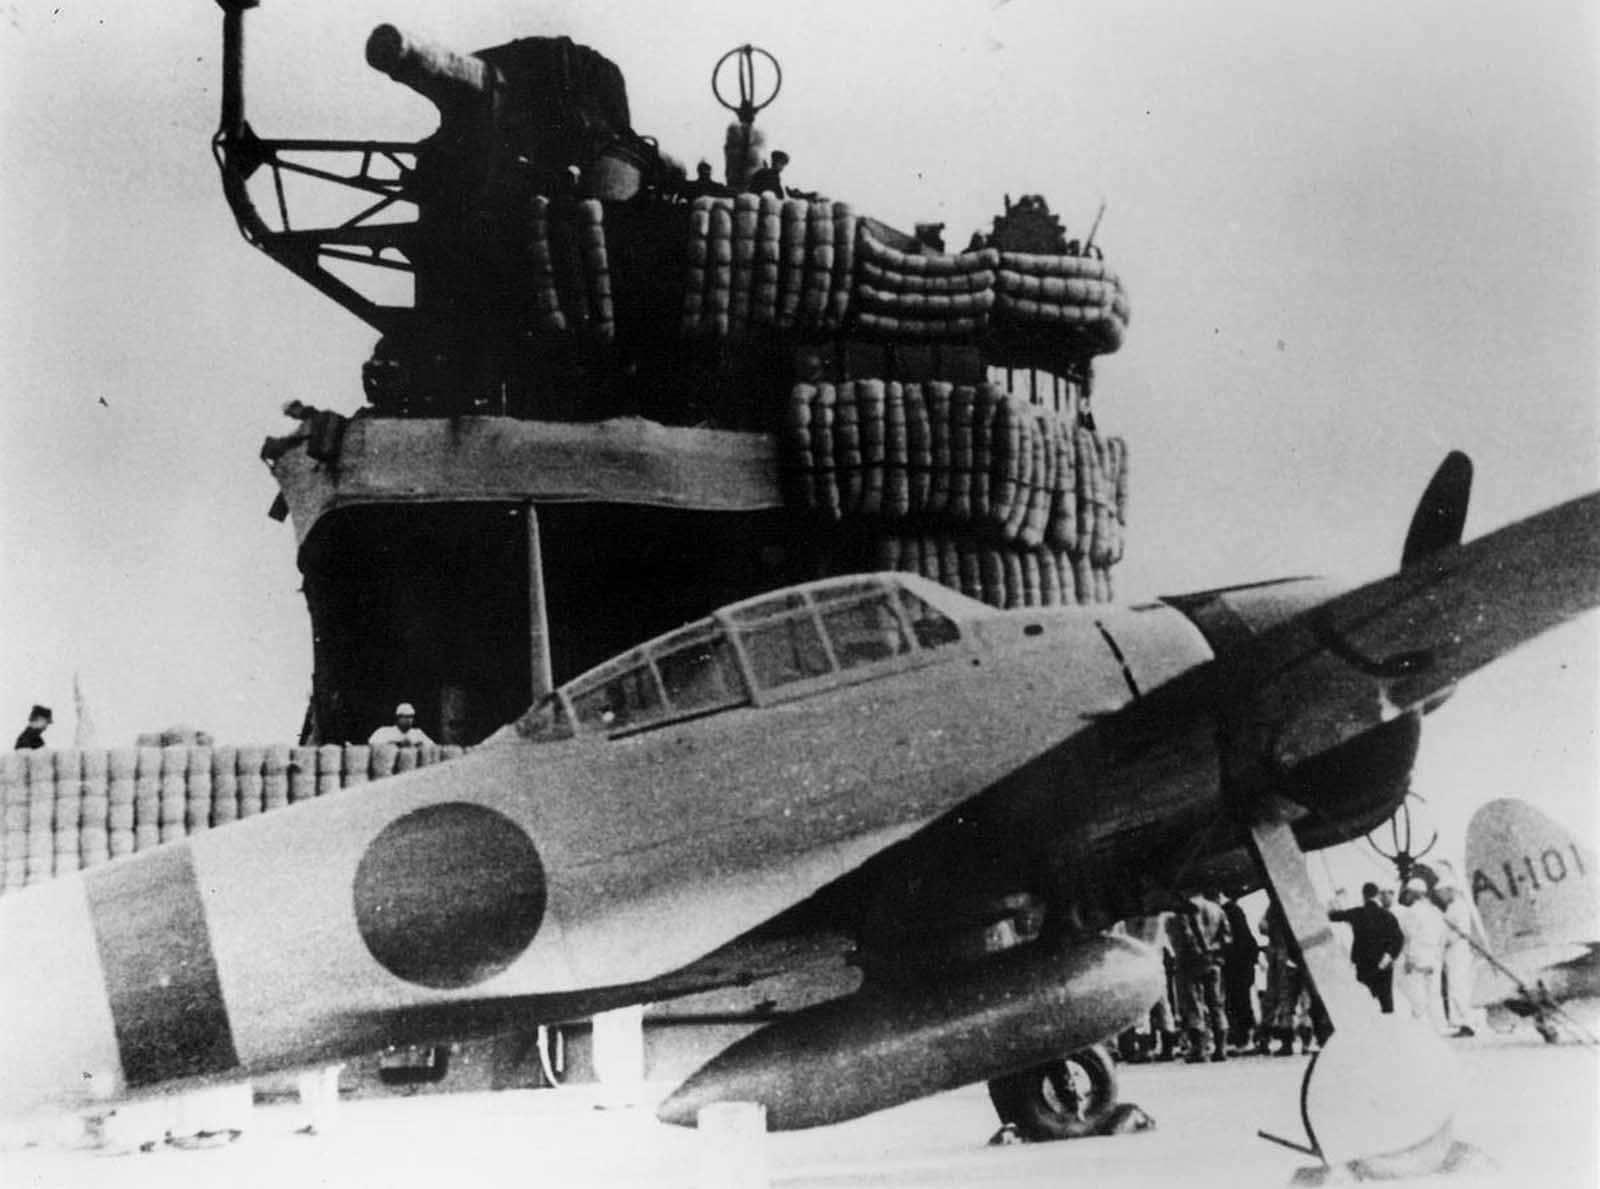 An A6M-2 Zero fighter aboard the Imperial Japanese Navy carrier Akagi during the Pearl Harbor attack mission.